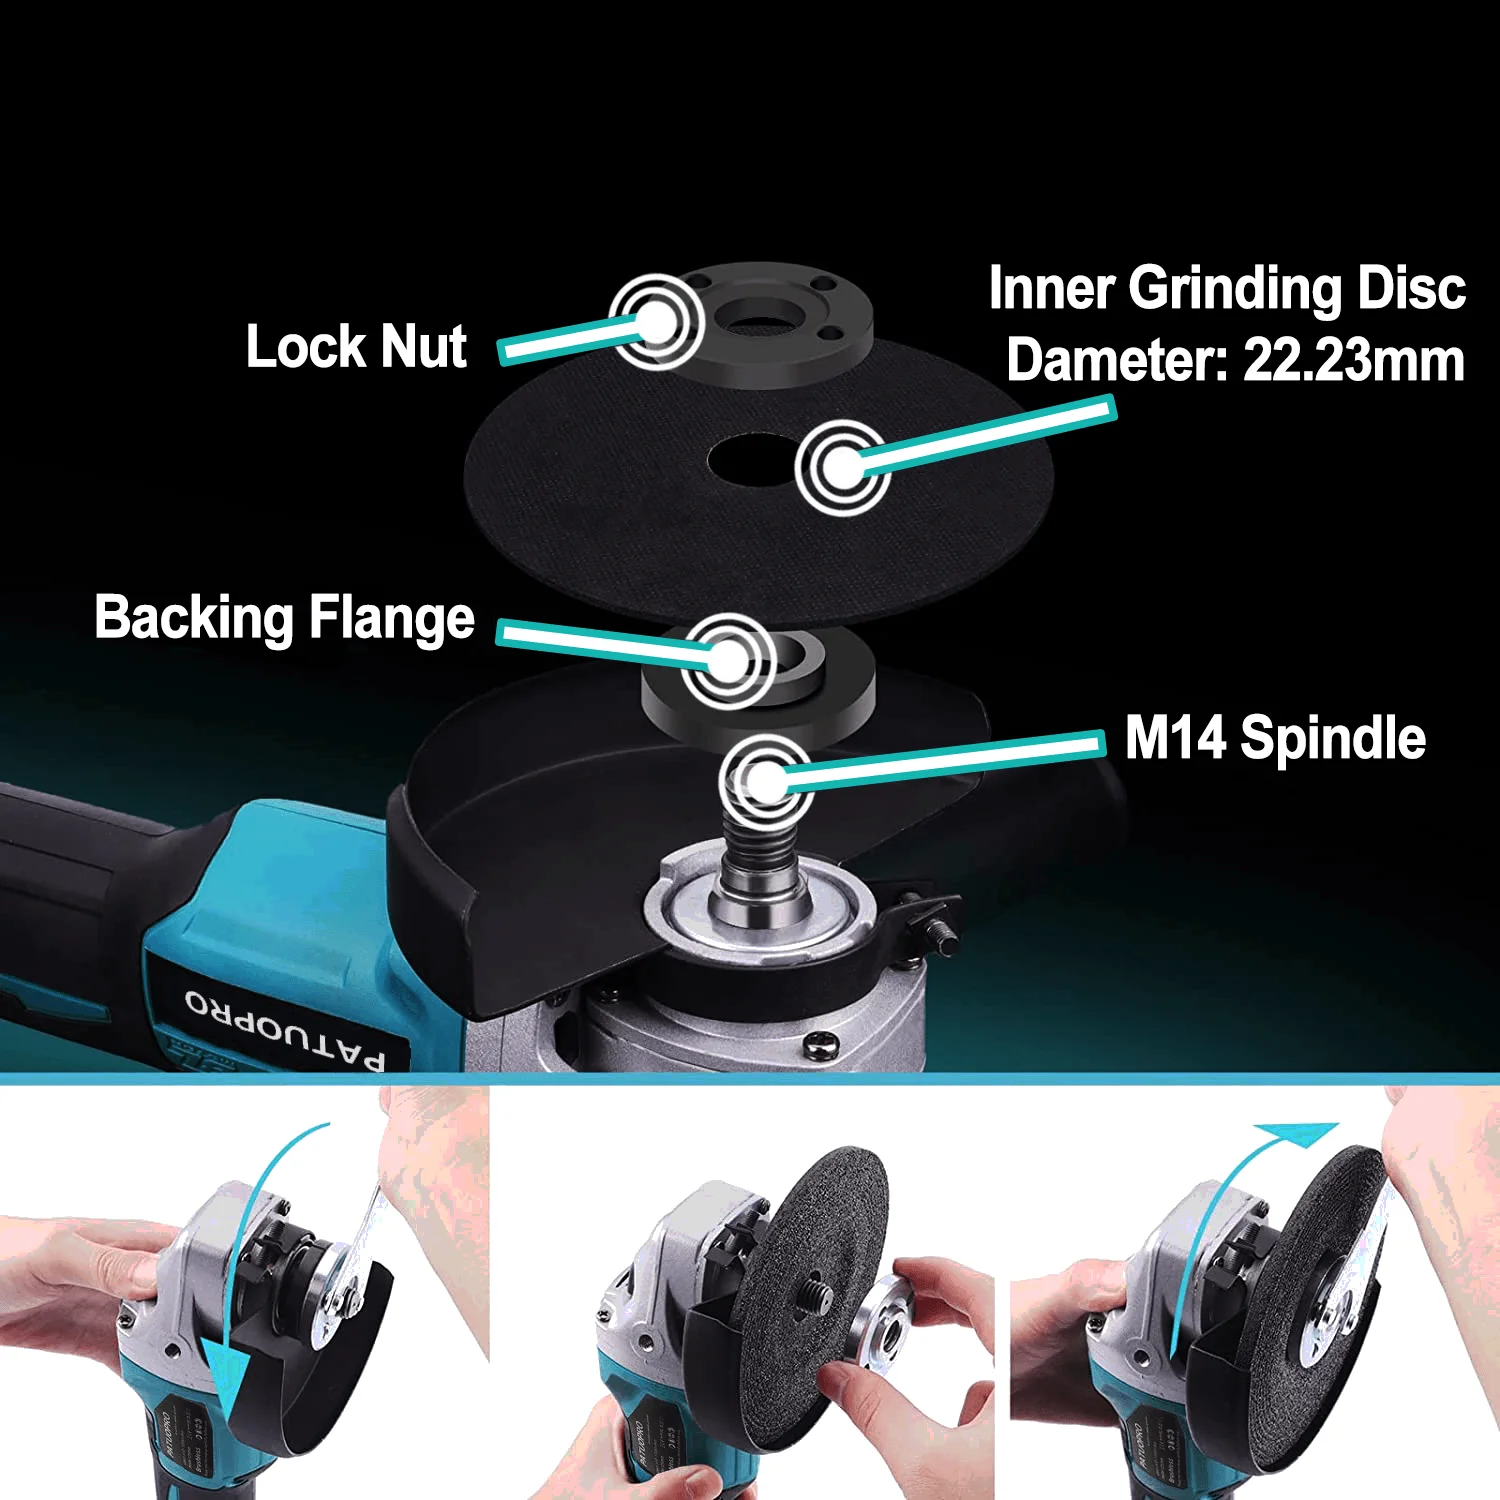 https://ae01.alicdn.com/kf/S1b2e31d92a244c2da2edceacab1b1acdF/125mm-Electric-Cordless-Angle-Grinder-Brushless-Cutting-Polishing-Grinding-Machine-Fit-Makita-18V-Battery-No-Battery.png